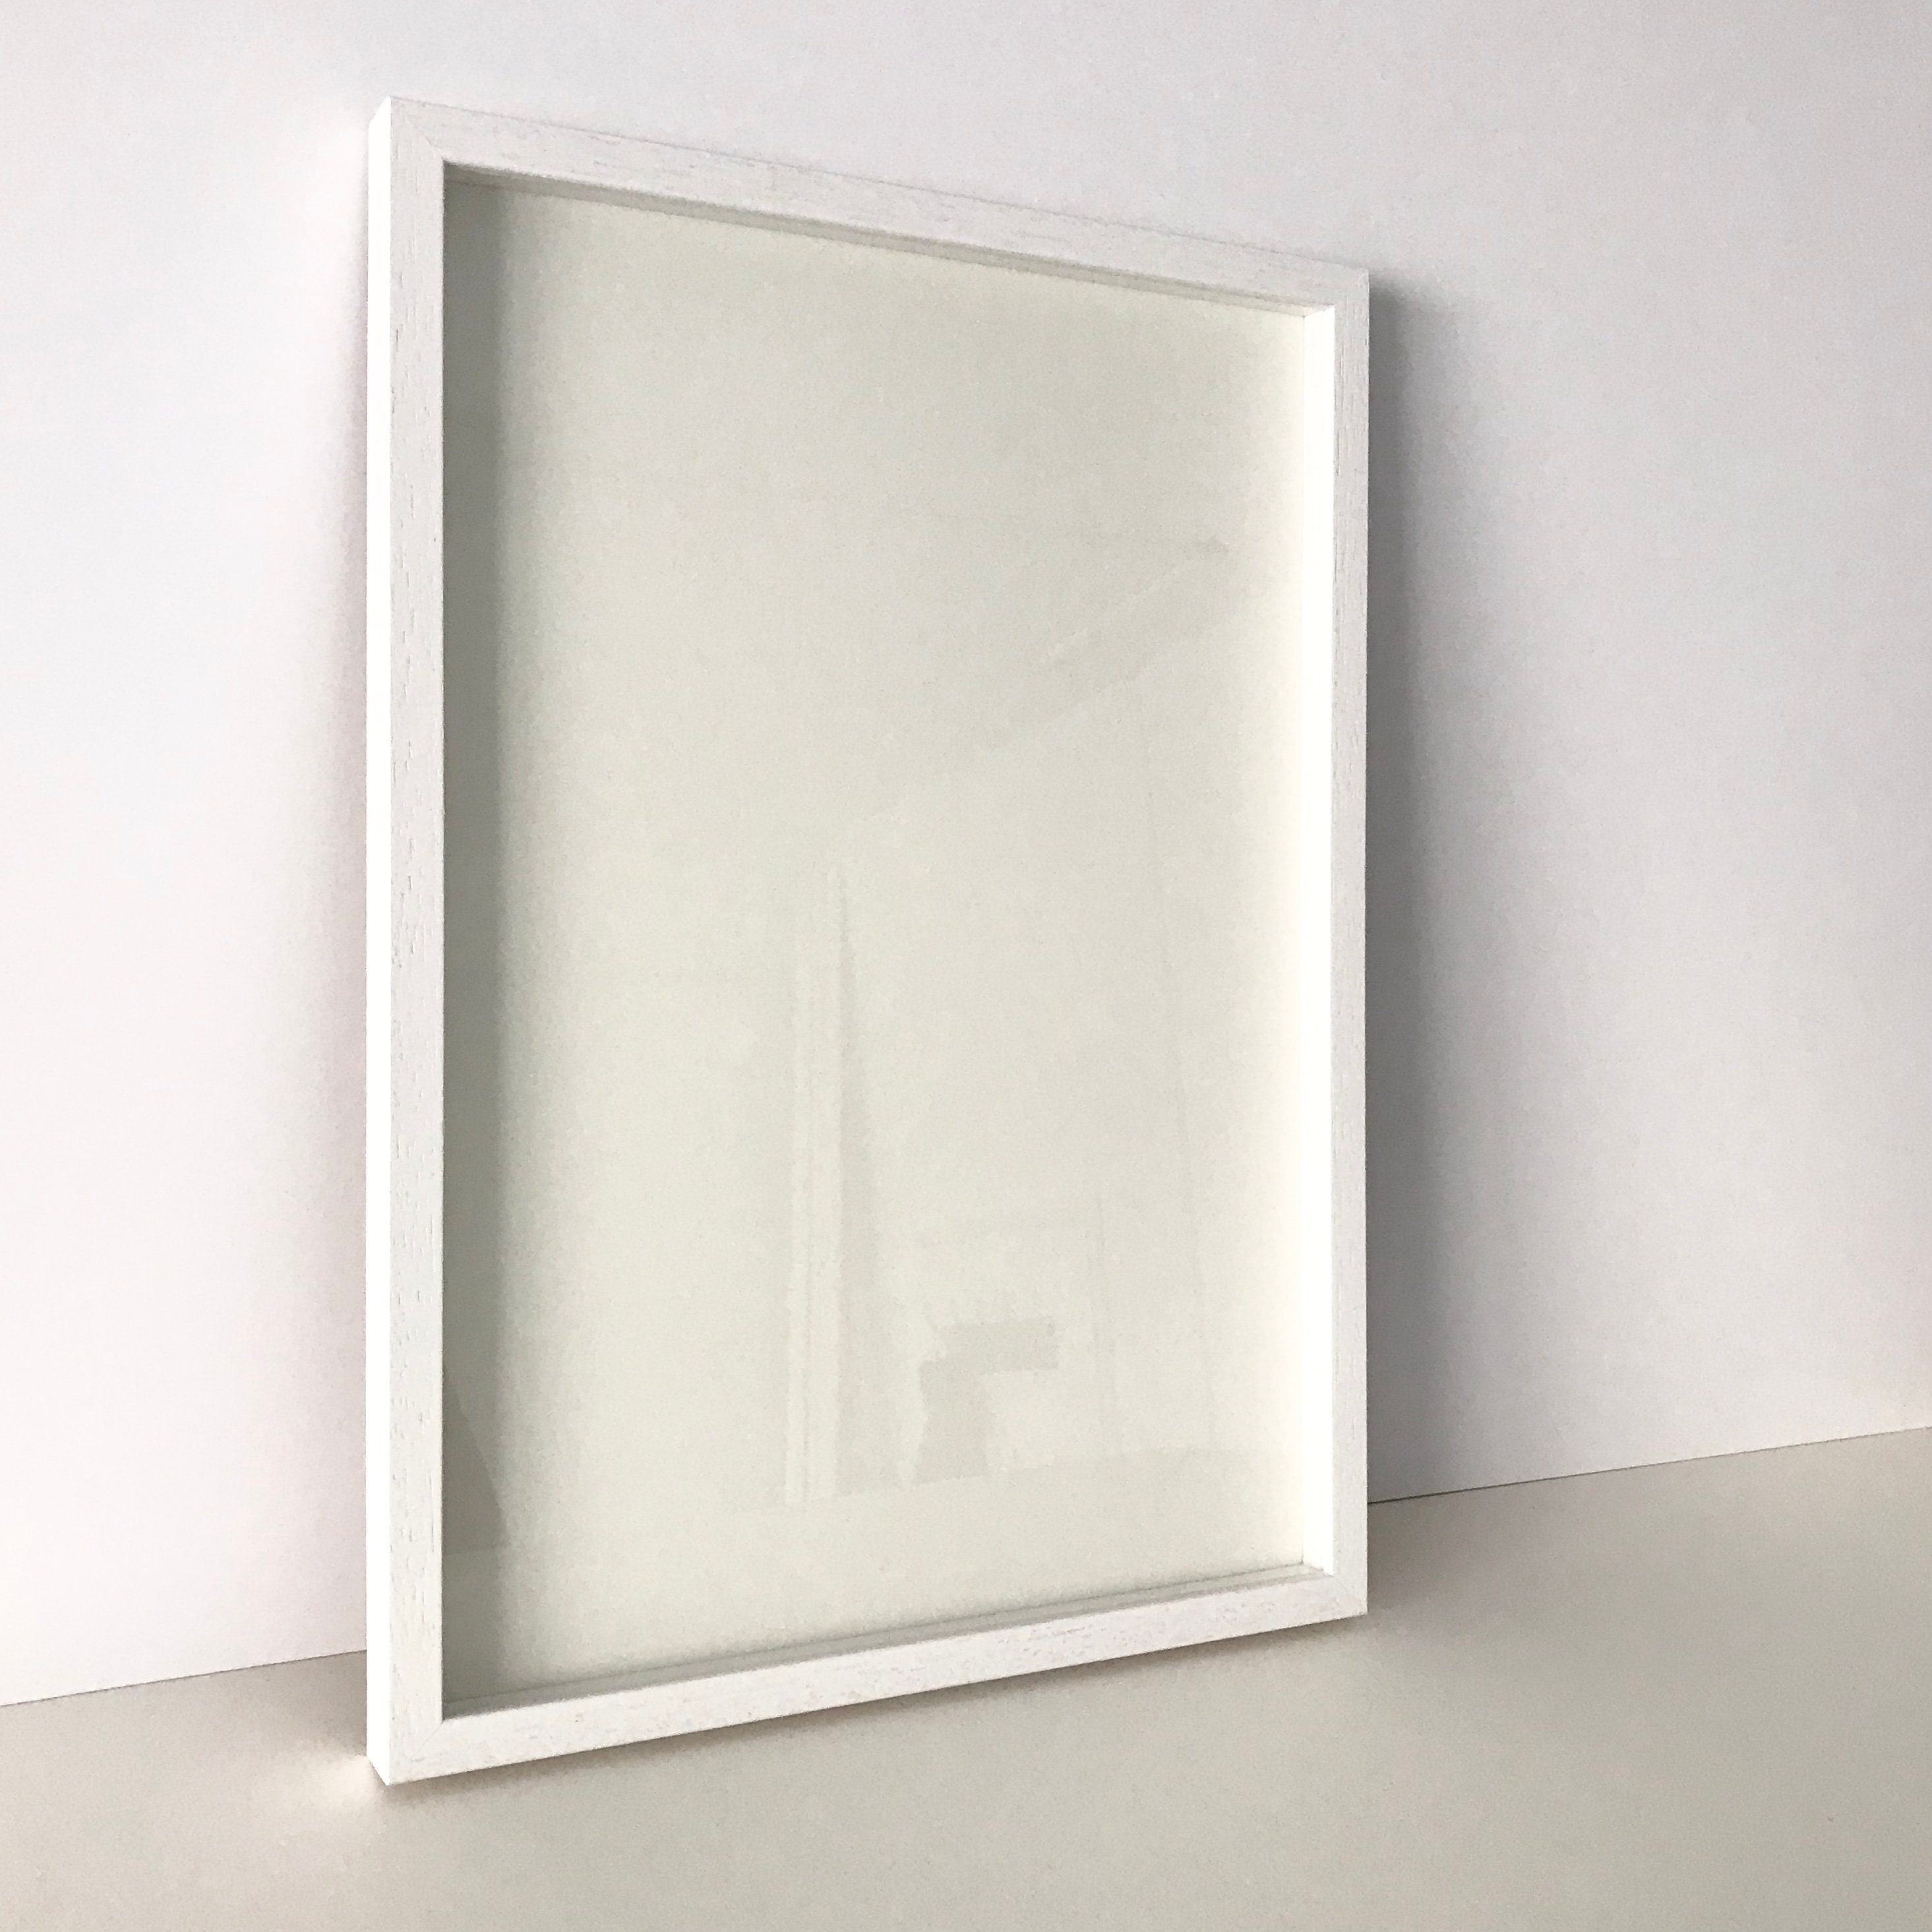 White 30x30 wooden picture frame - Narrow